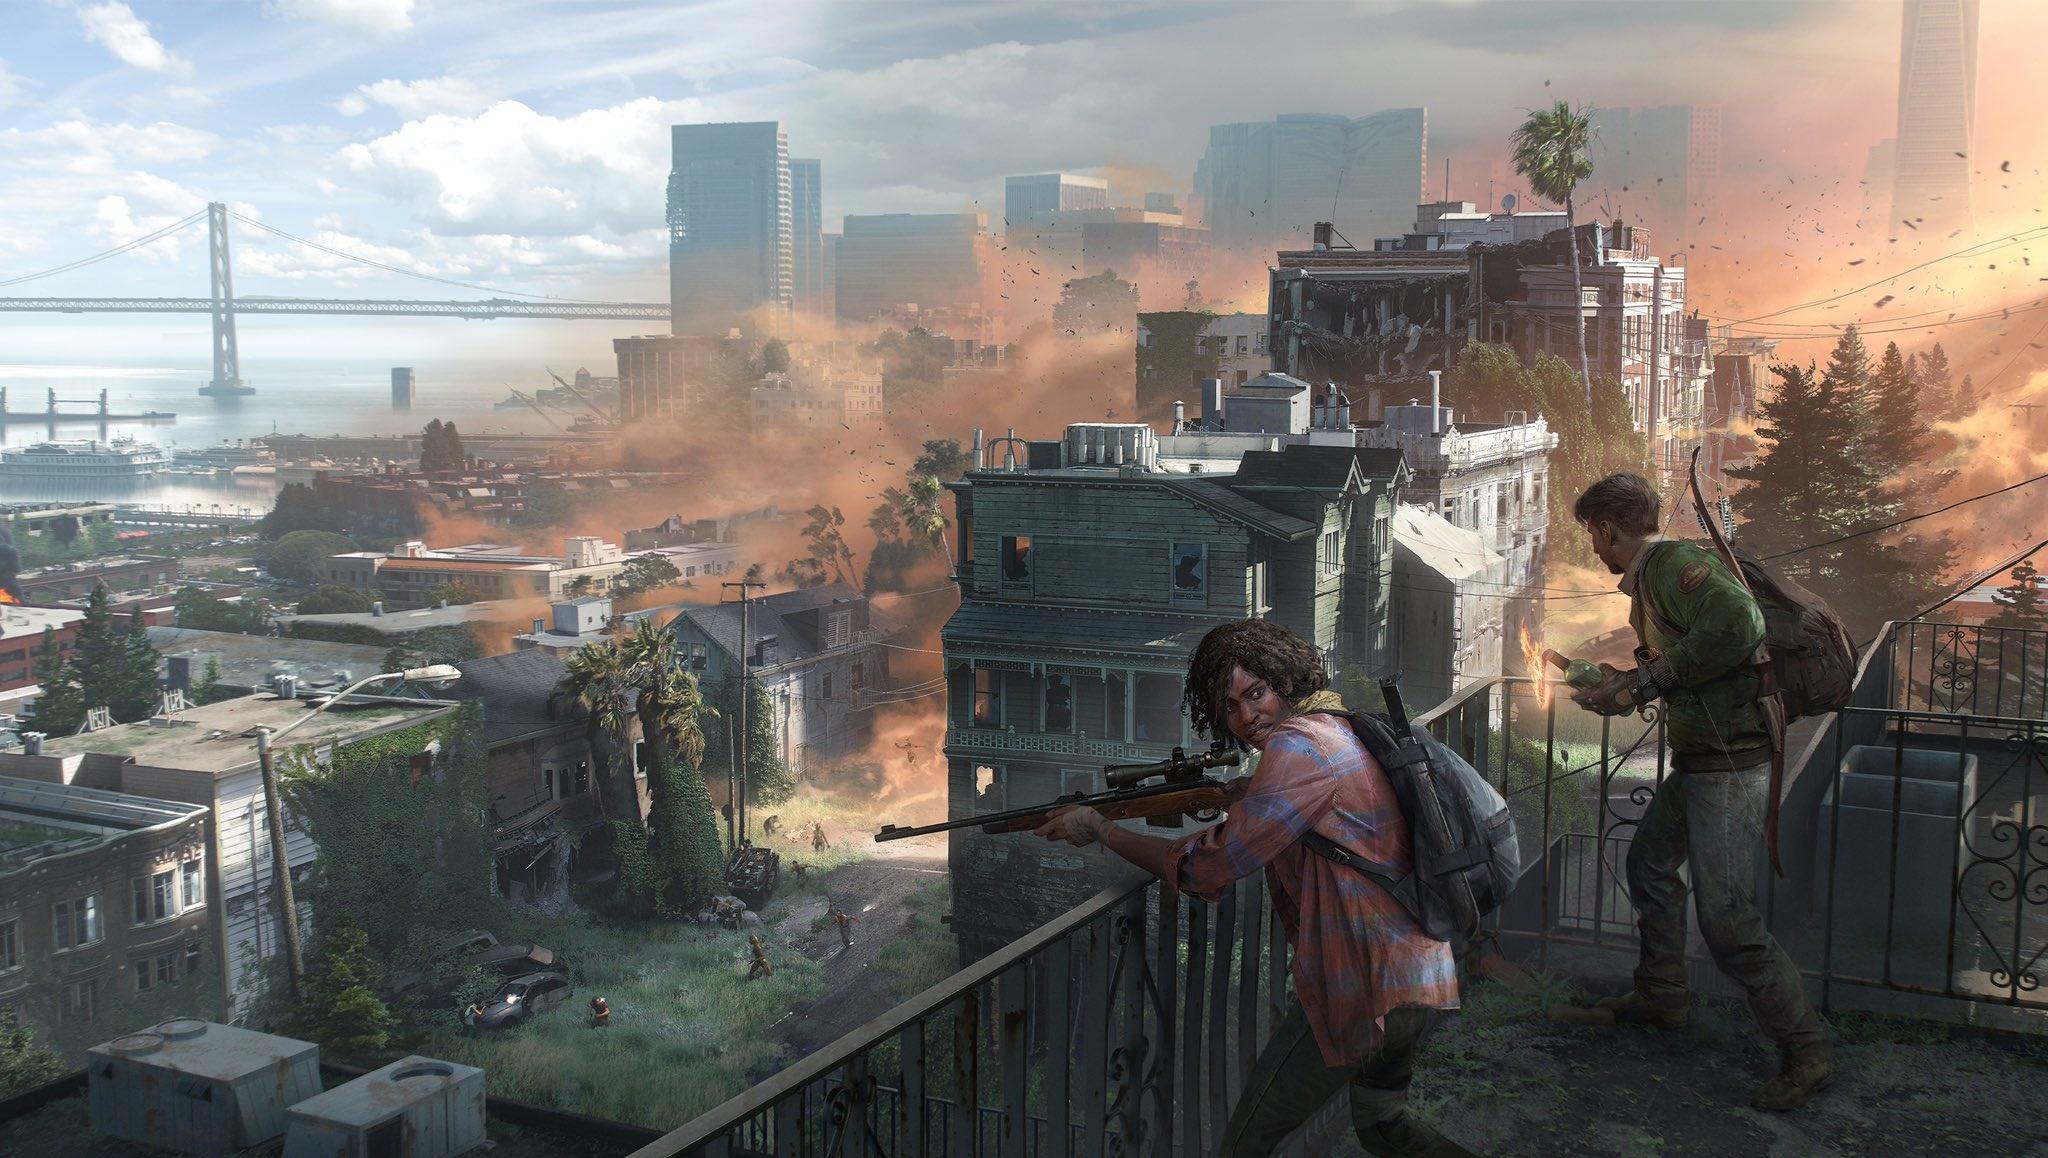 Is The Last Of Us Multiplayer Game Coming Soon? – What To Expect